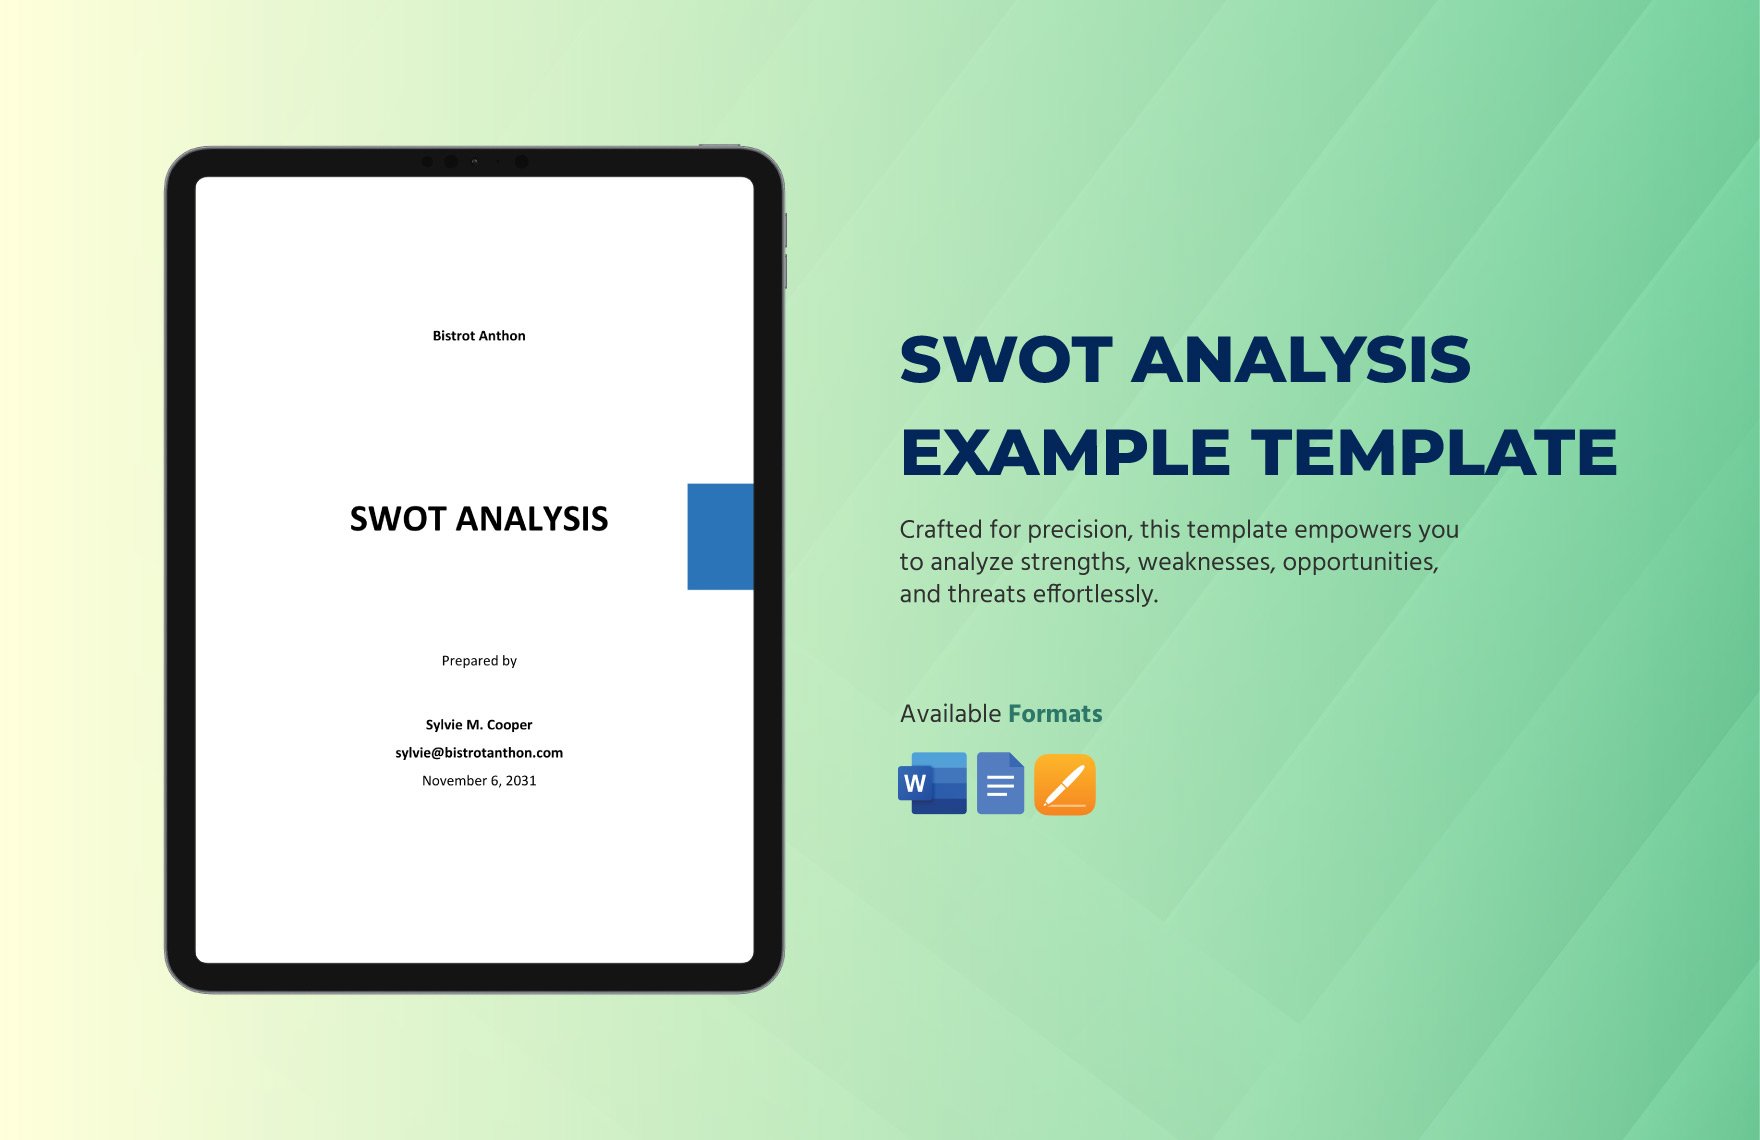 SWOT Analysis Example Template